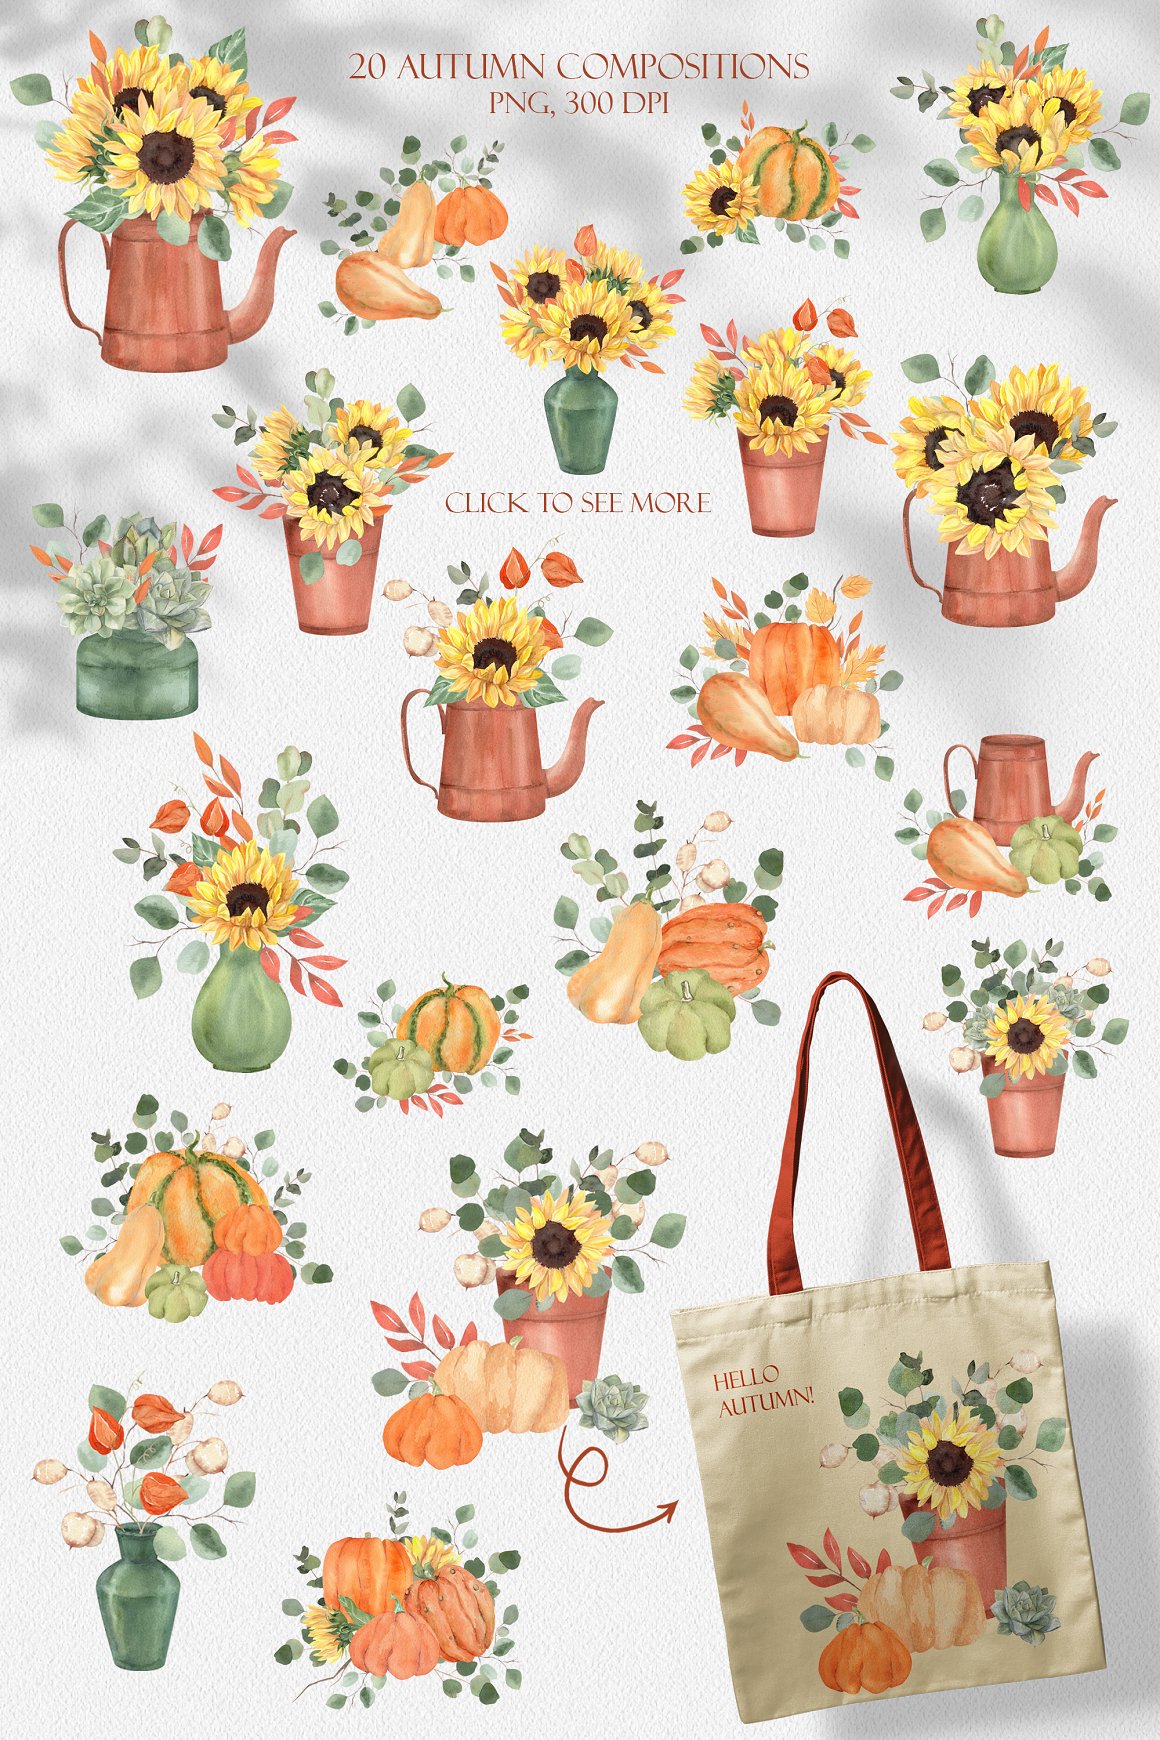 Sunflowers for prints on bags and things.